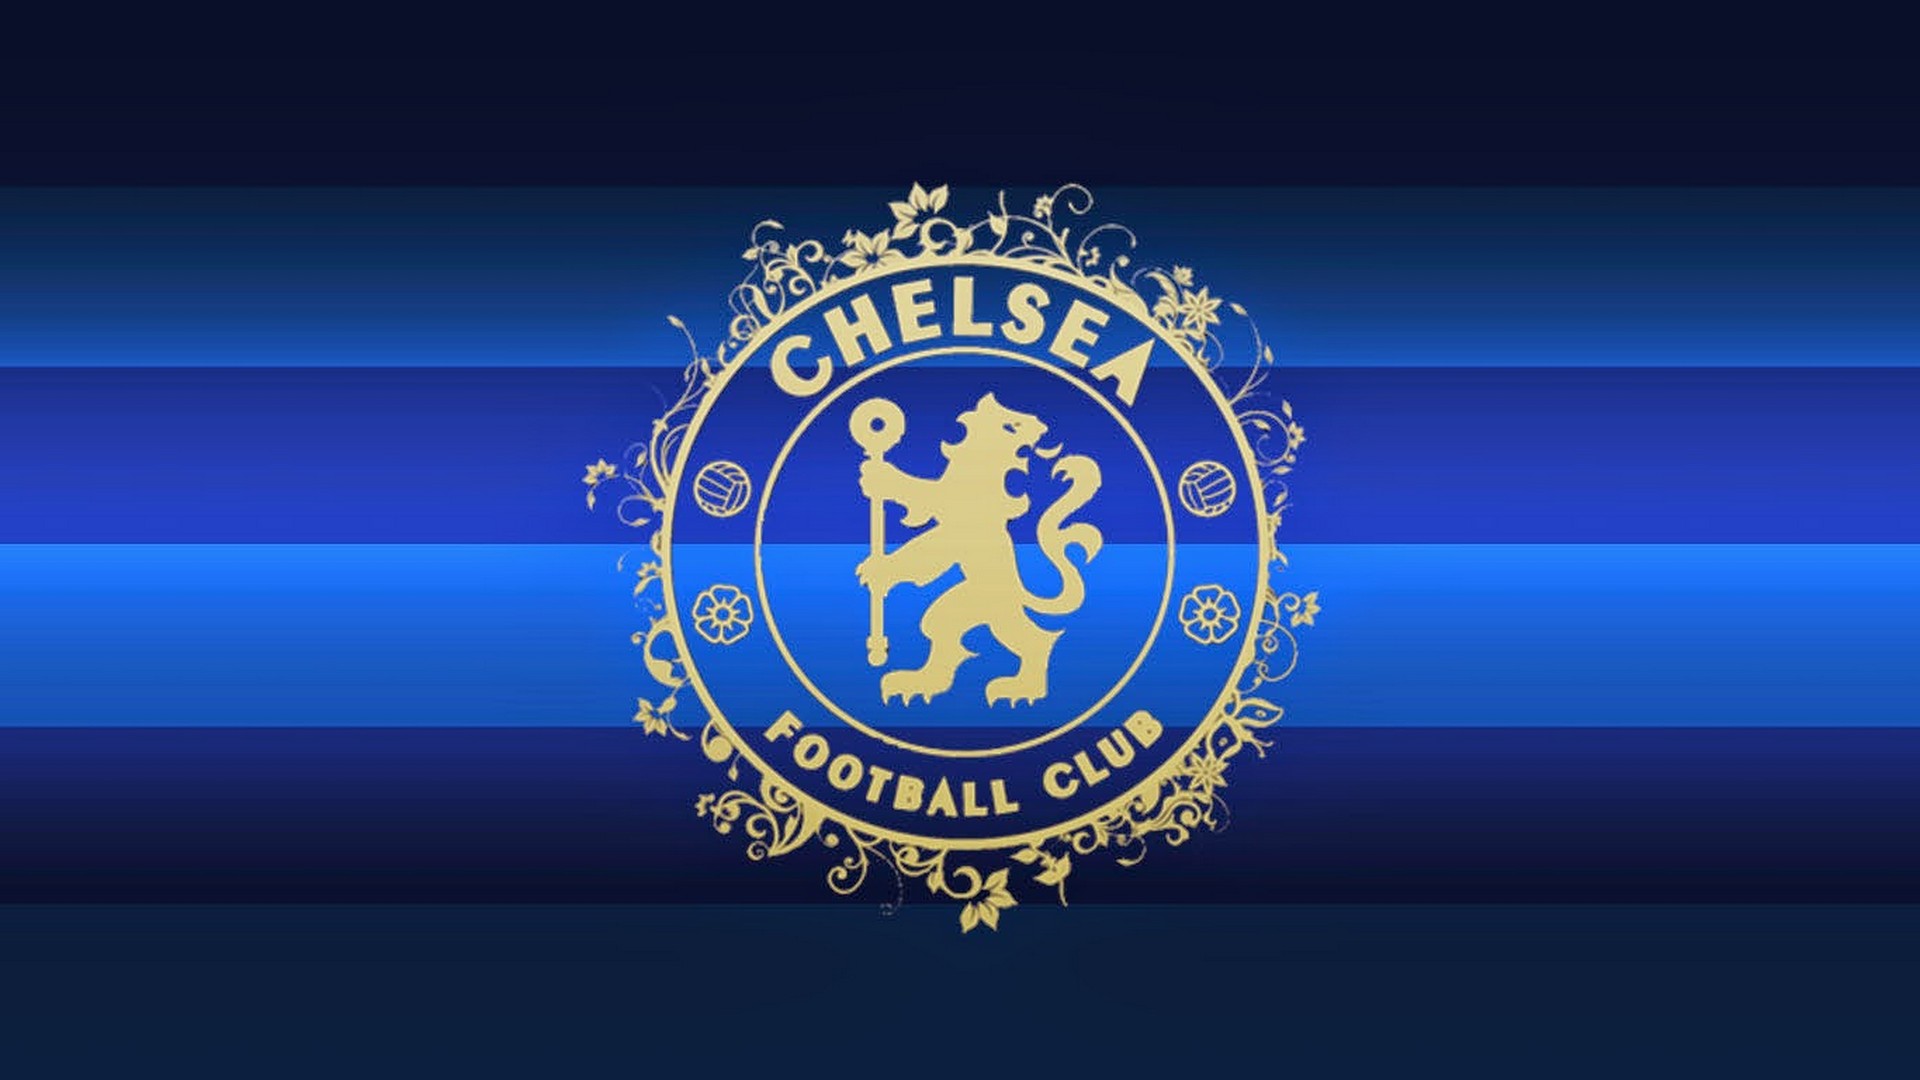 Wallpapers HD Chelsea Soccer with resolution 1920x1080 pixel. You can make this wallpaper for your Mac or Windows Desktop Background, iPhone, Android or Tablet and another Smartphone device